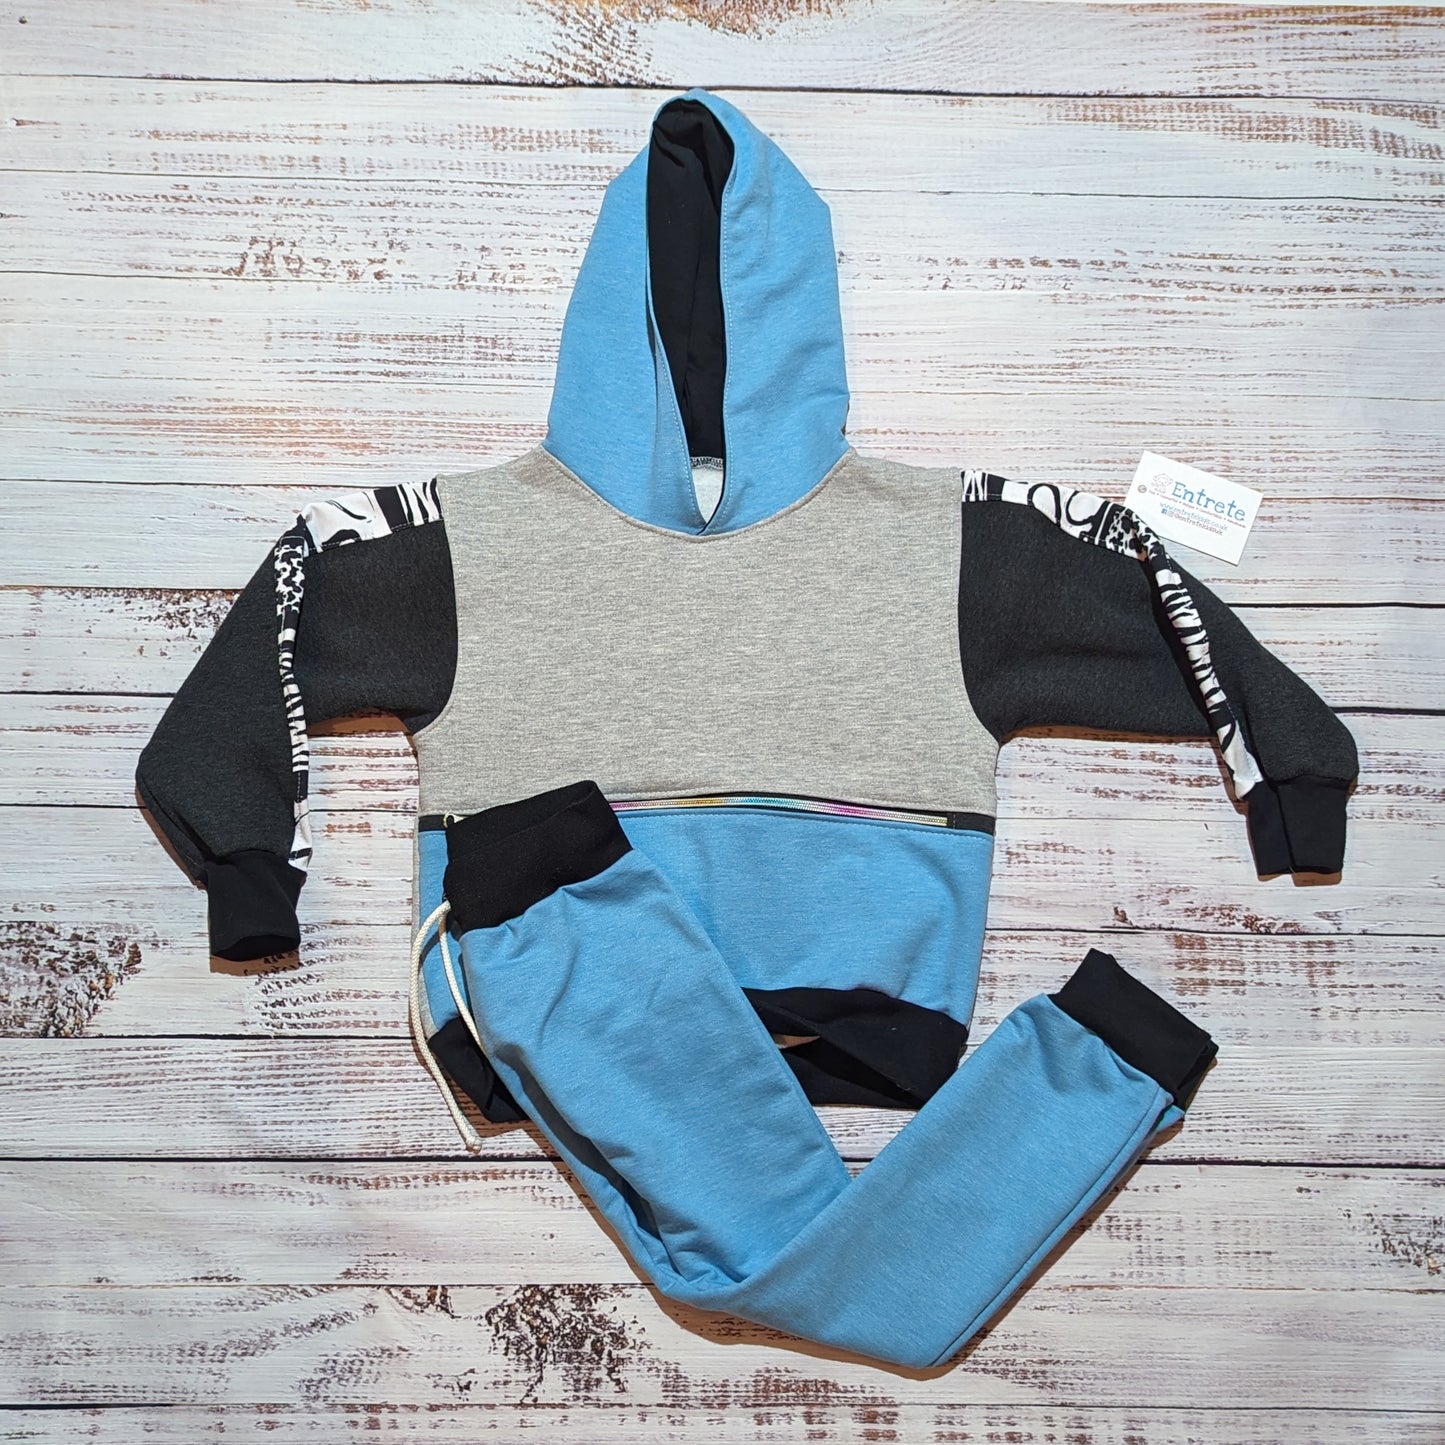 Sky blue, grey and animal hearts hoodie, with a zipped front pocket. Handmade using soft and comfortable cotton French terry. Shown as a set with matching sky blue harem joggers.